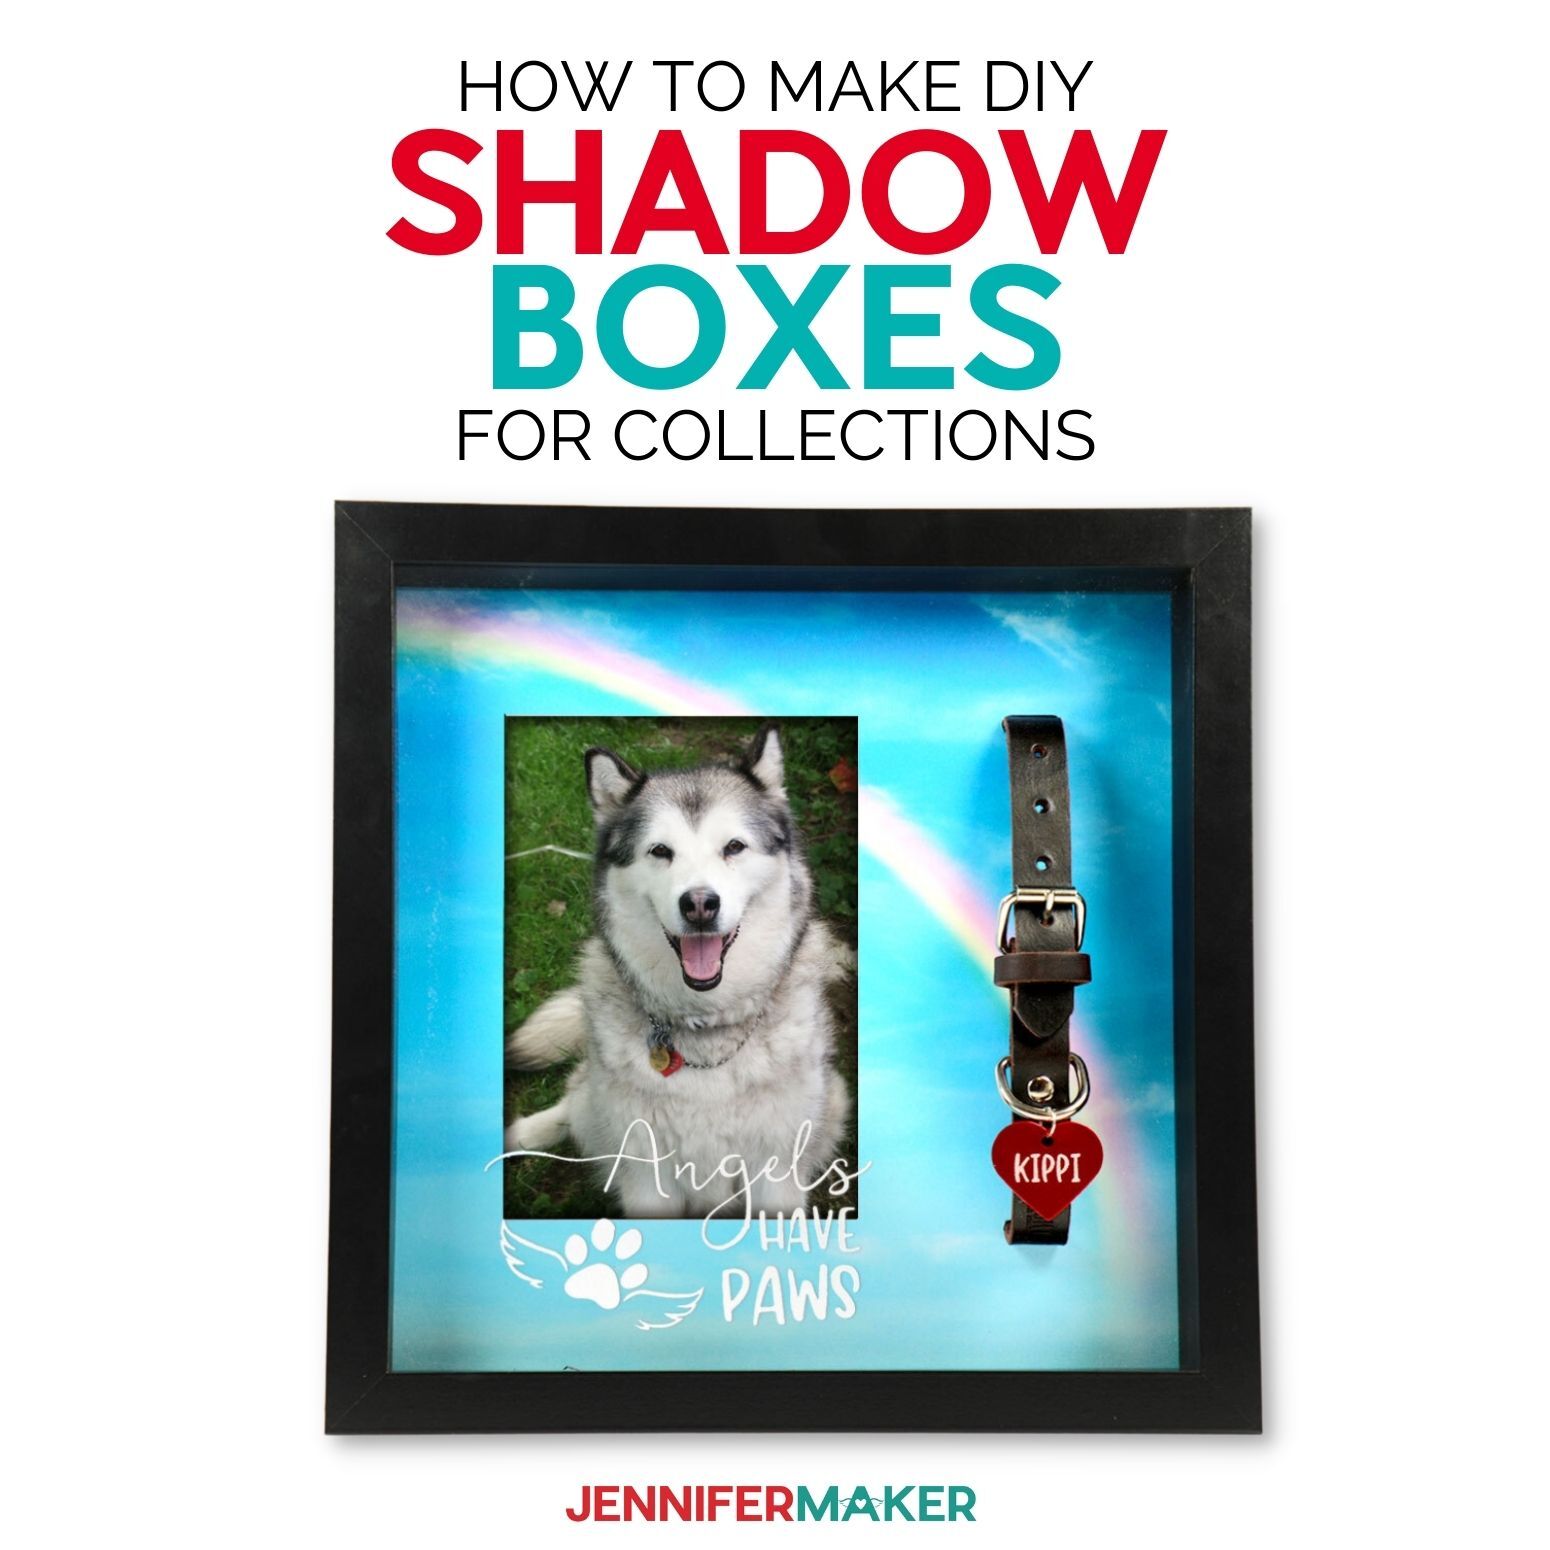 DIY Shadow Boxes for Collections on a Cricut cutting machine